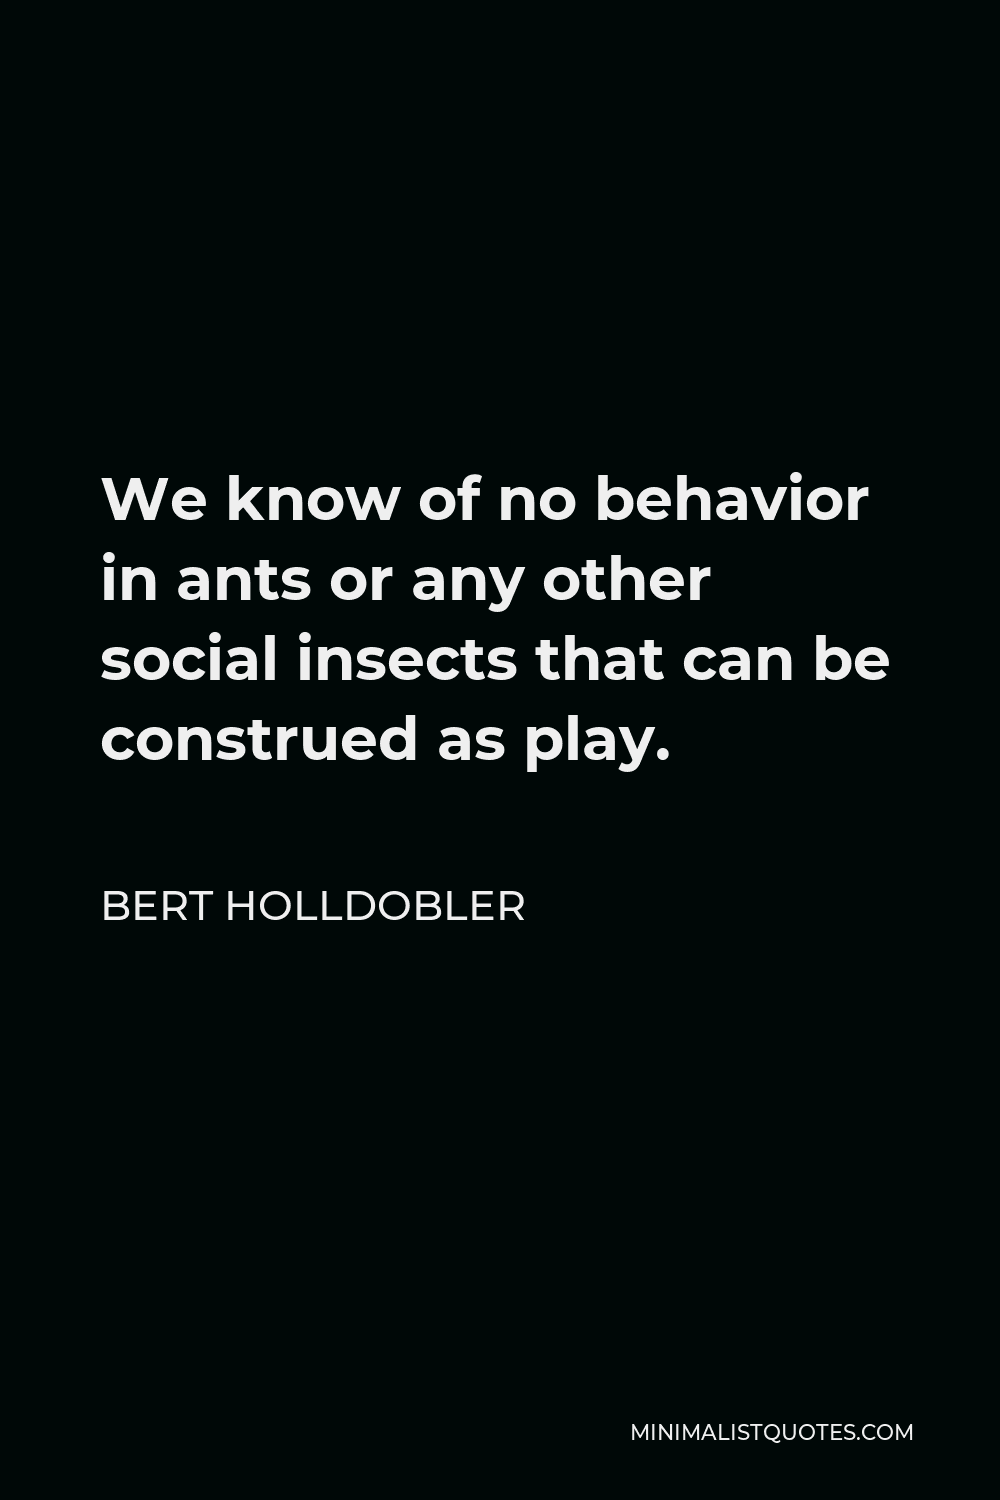 Bert Holldobler Quote - We know of no behavior in ants or any other social insects that can be construed as play.